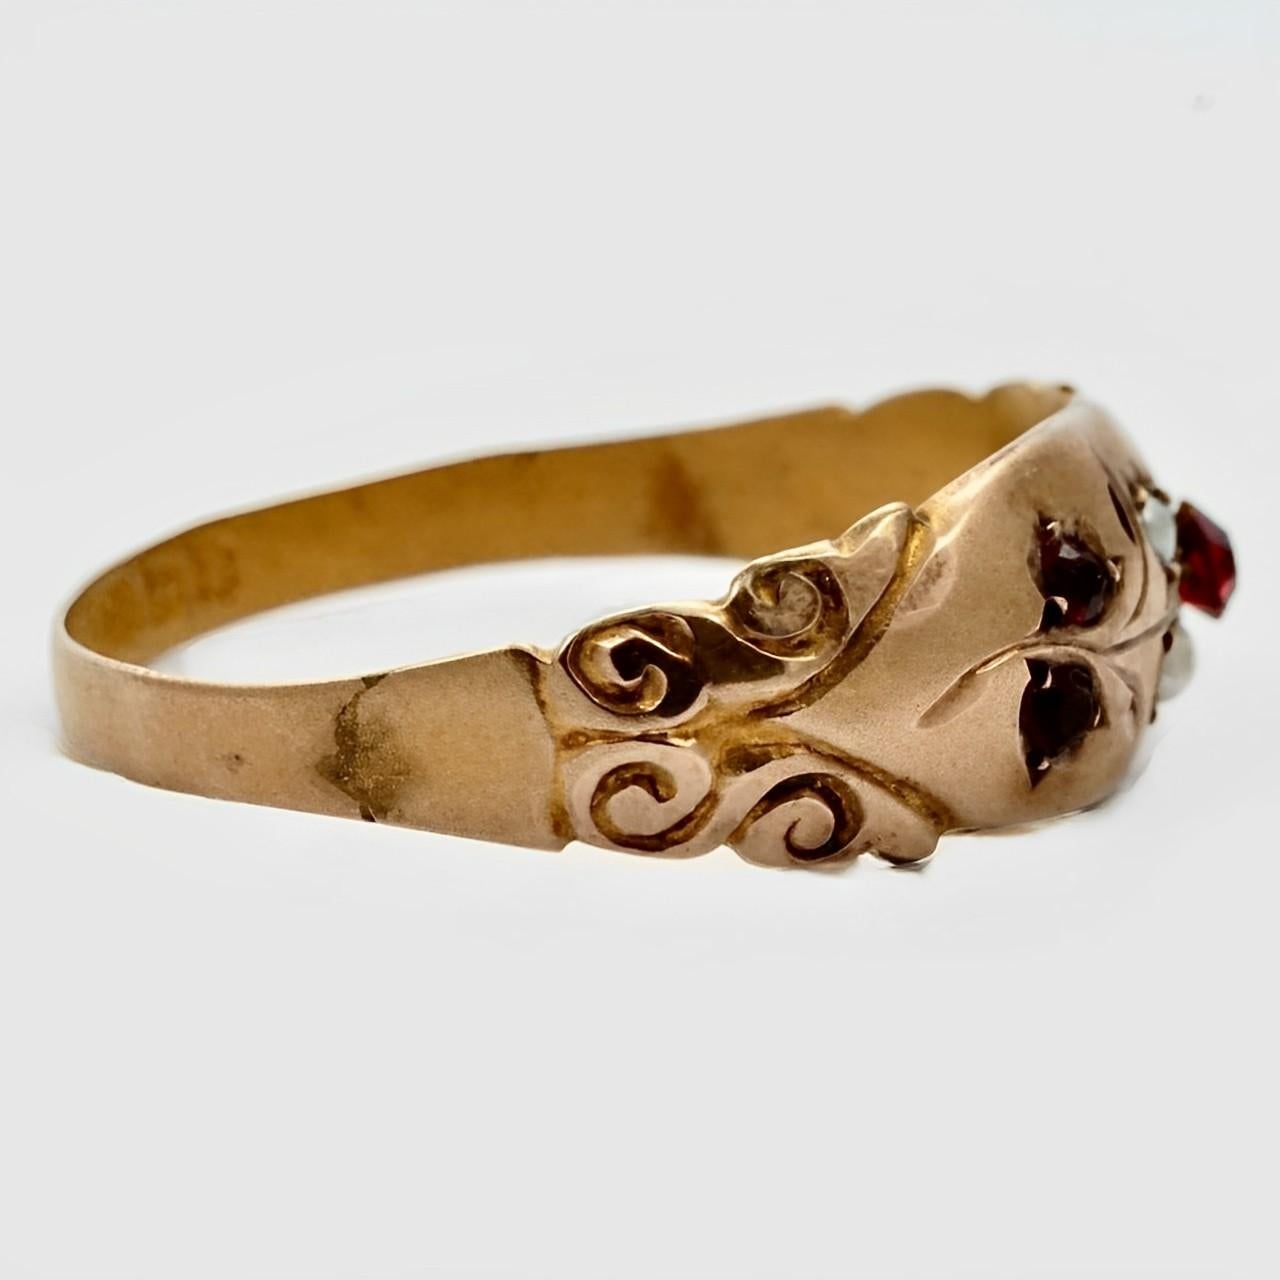 Edwardian Antique 9K Rose Gold Engraved Flower Ring with Red Stones and Faux Seed Pearls 